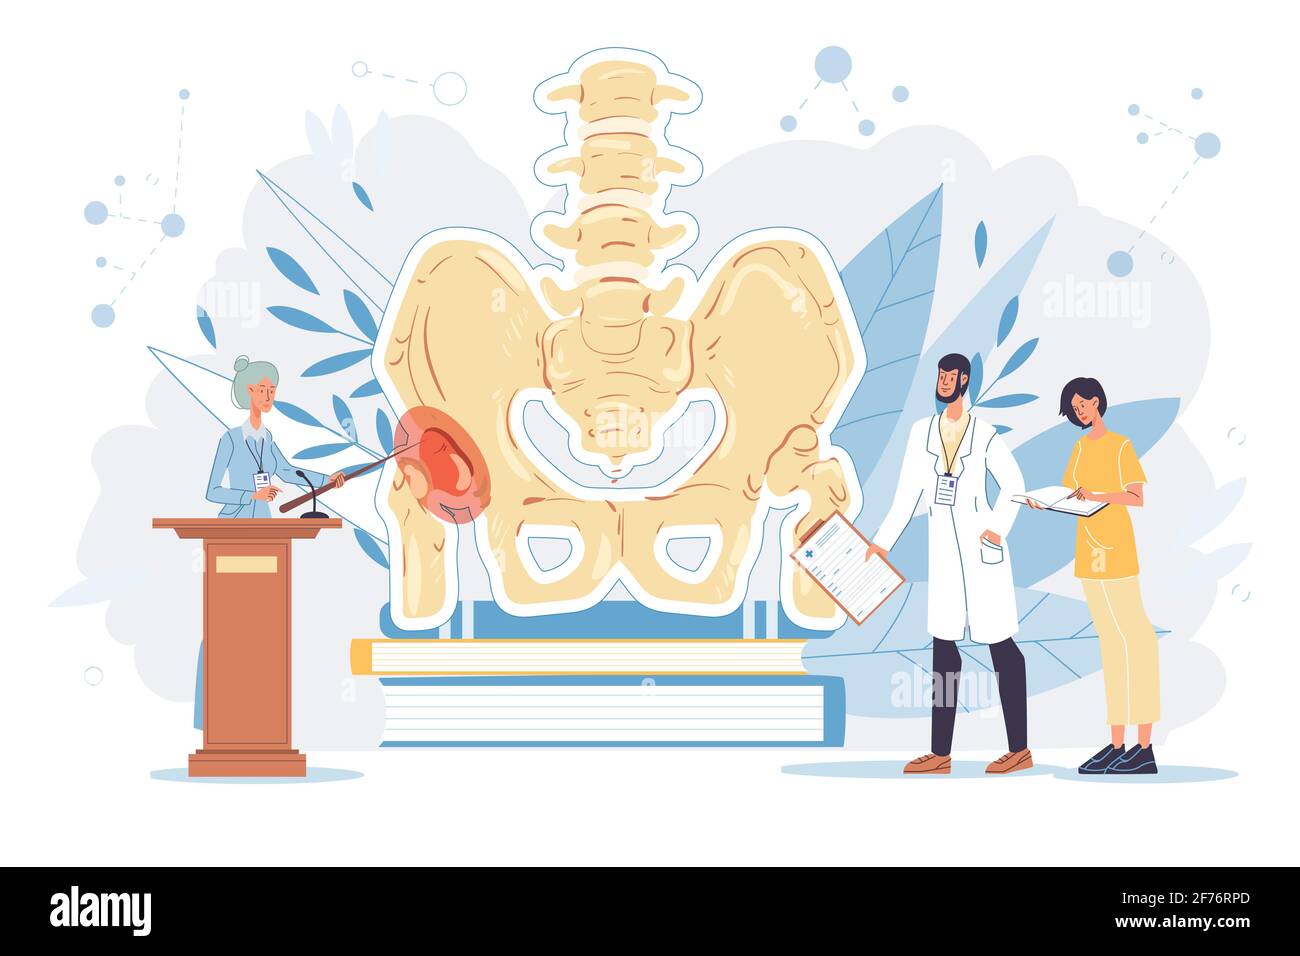 Flat cartoon doctor characters at work vector illustration concept ...